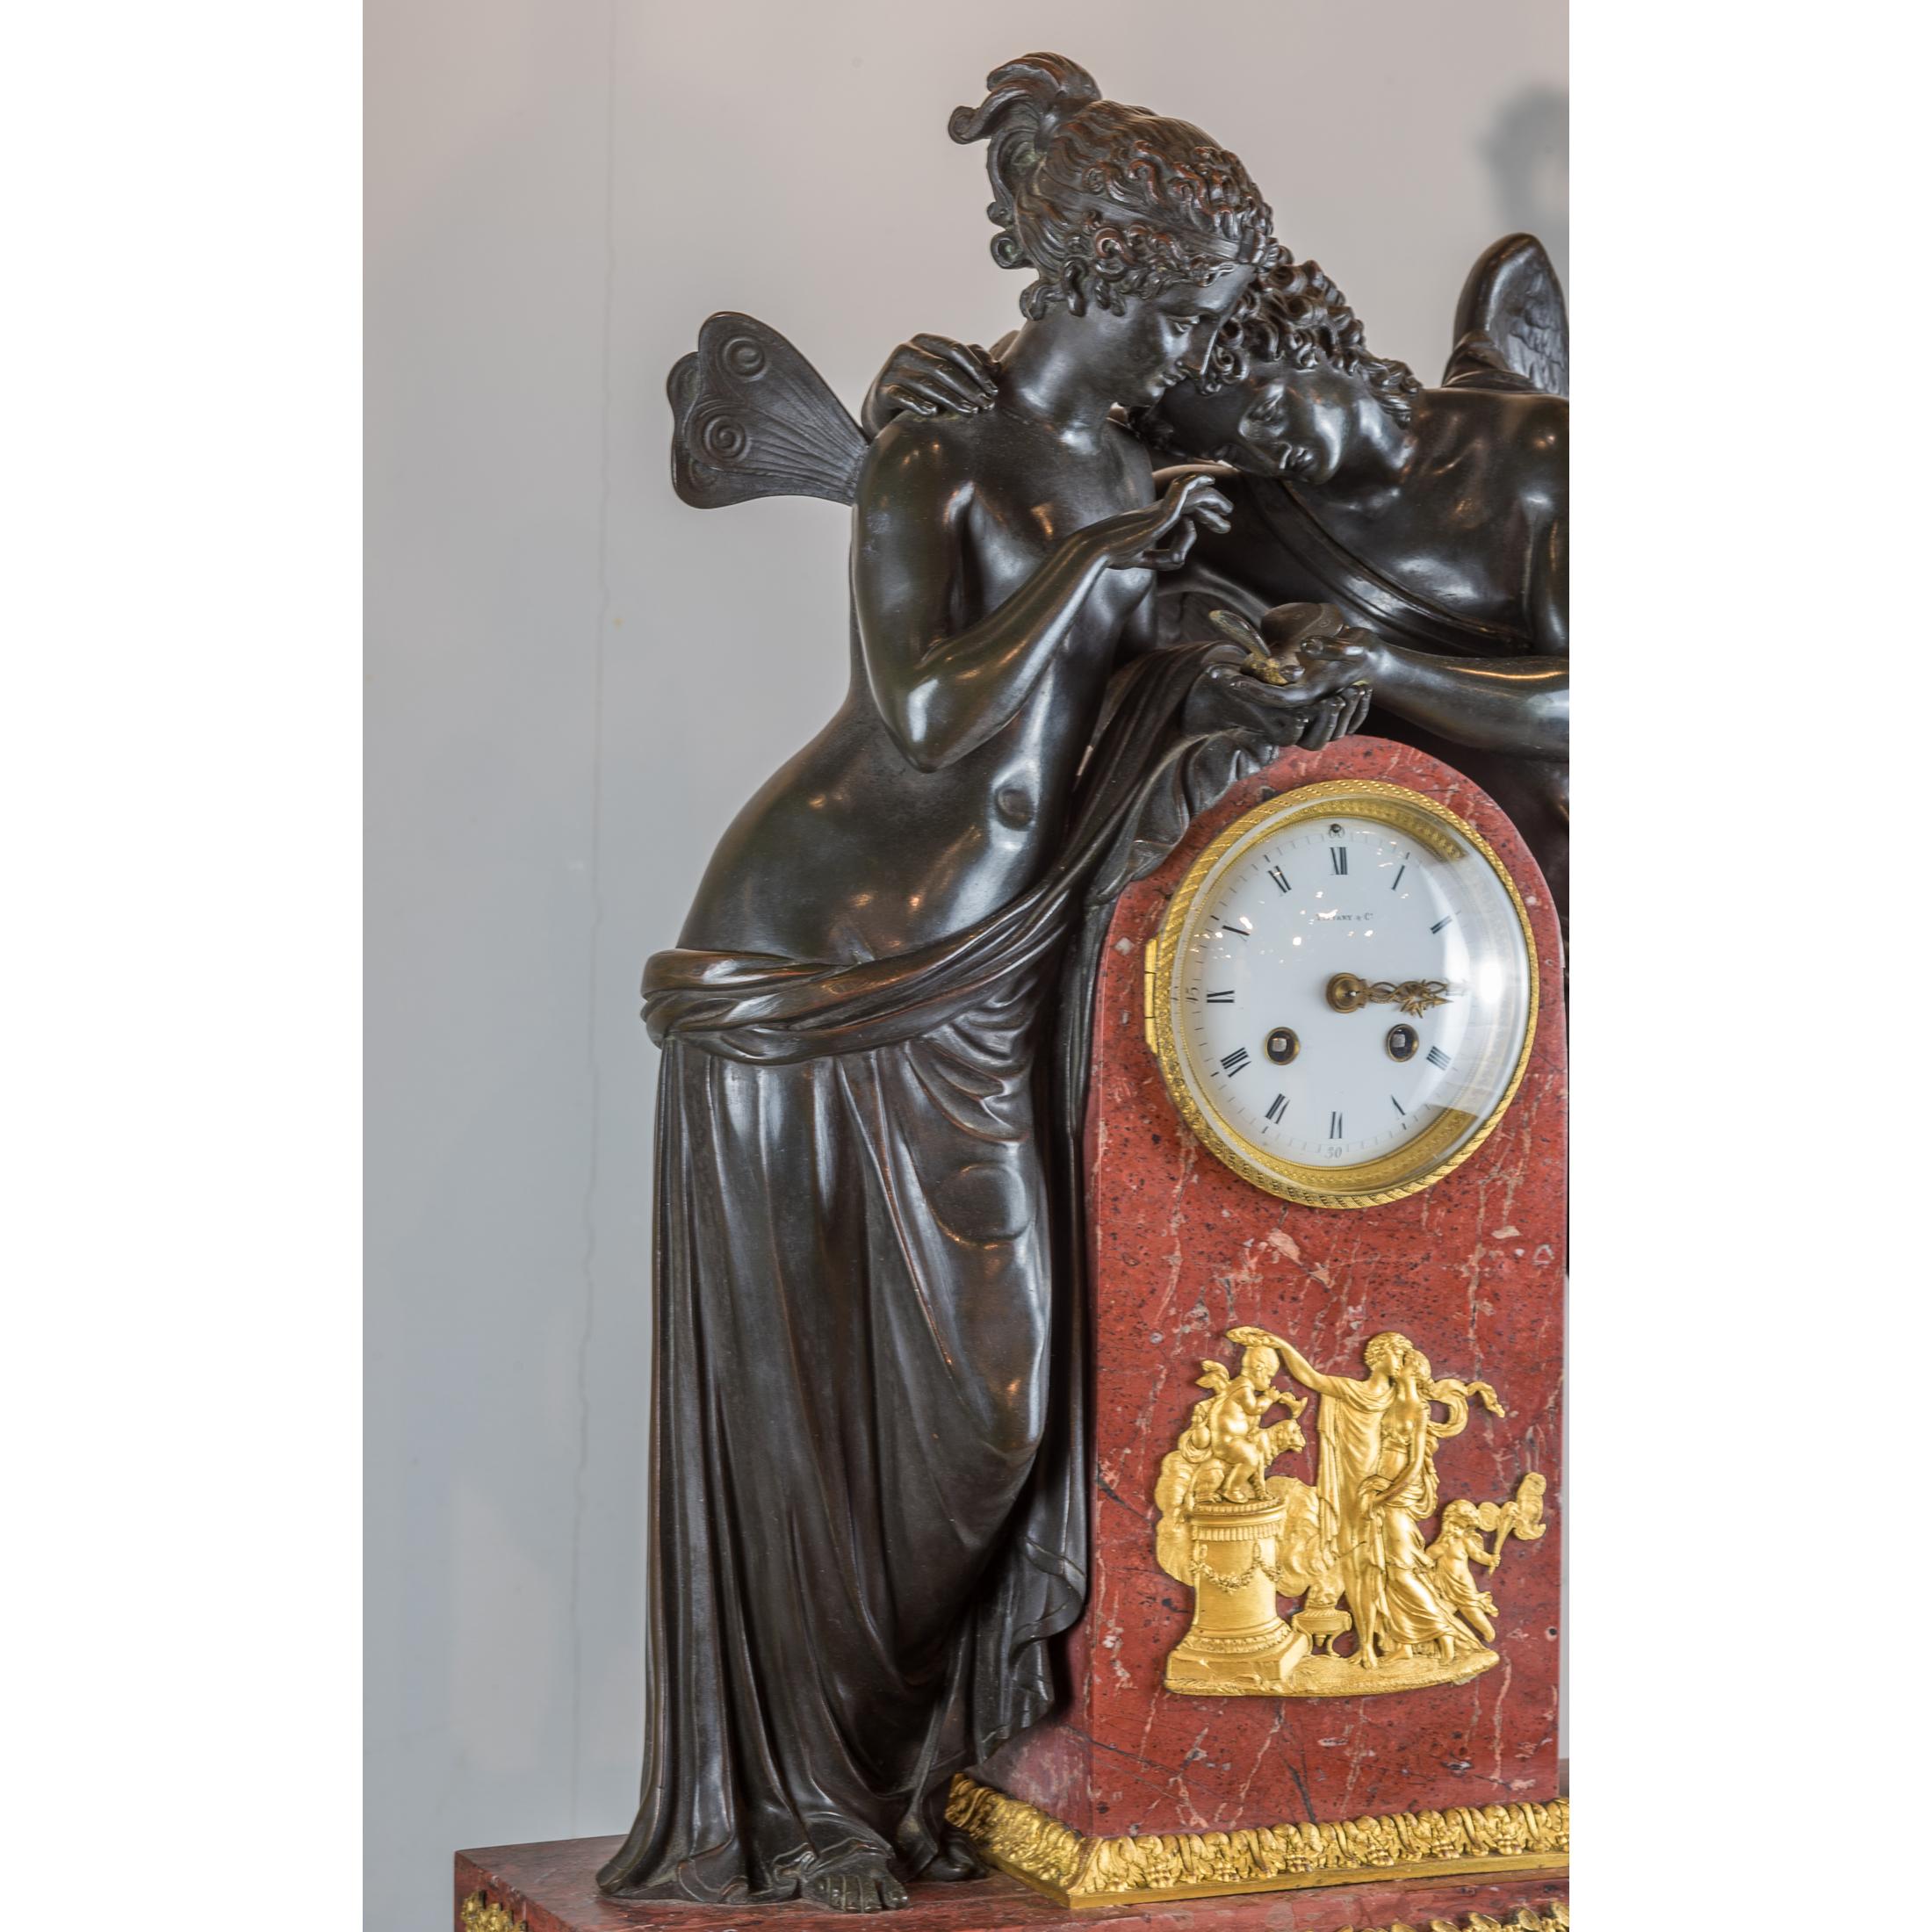 Marble Exquisite Figural Mantel Clock Retailed by Tiffany & Co. Signed Thomire